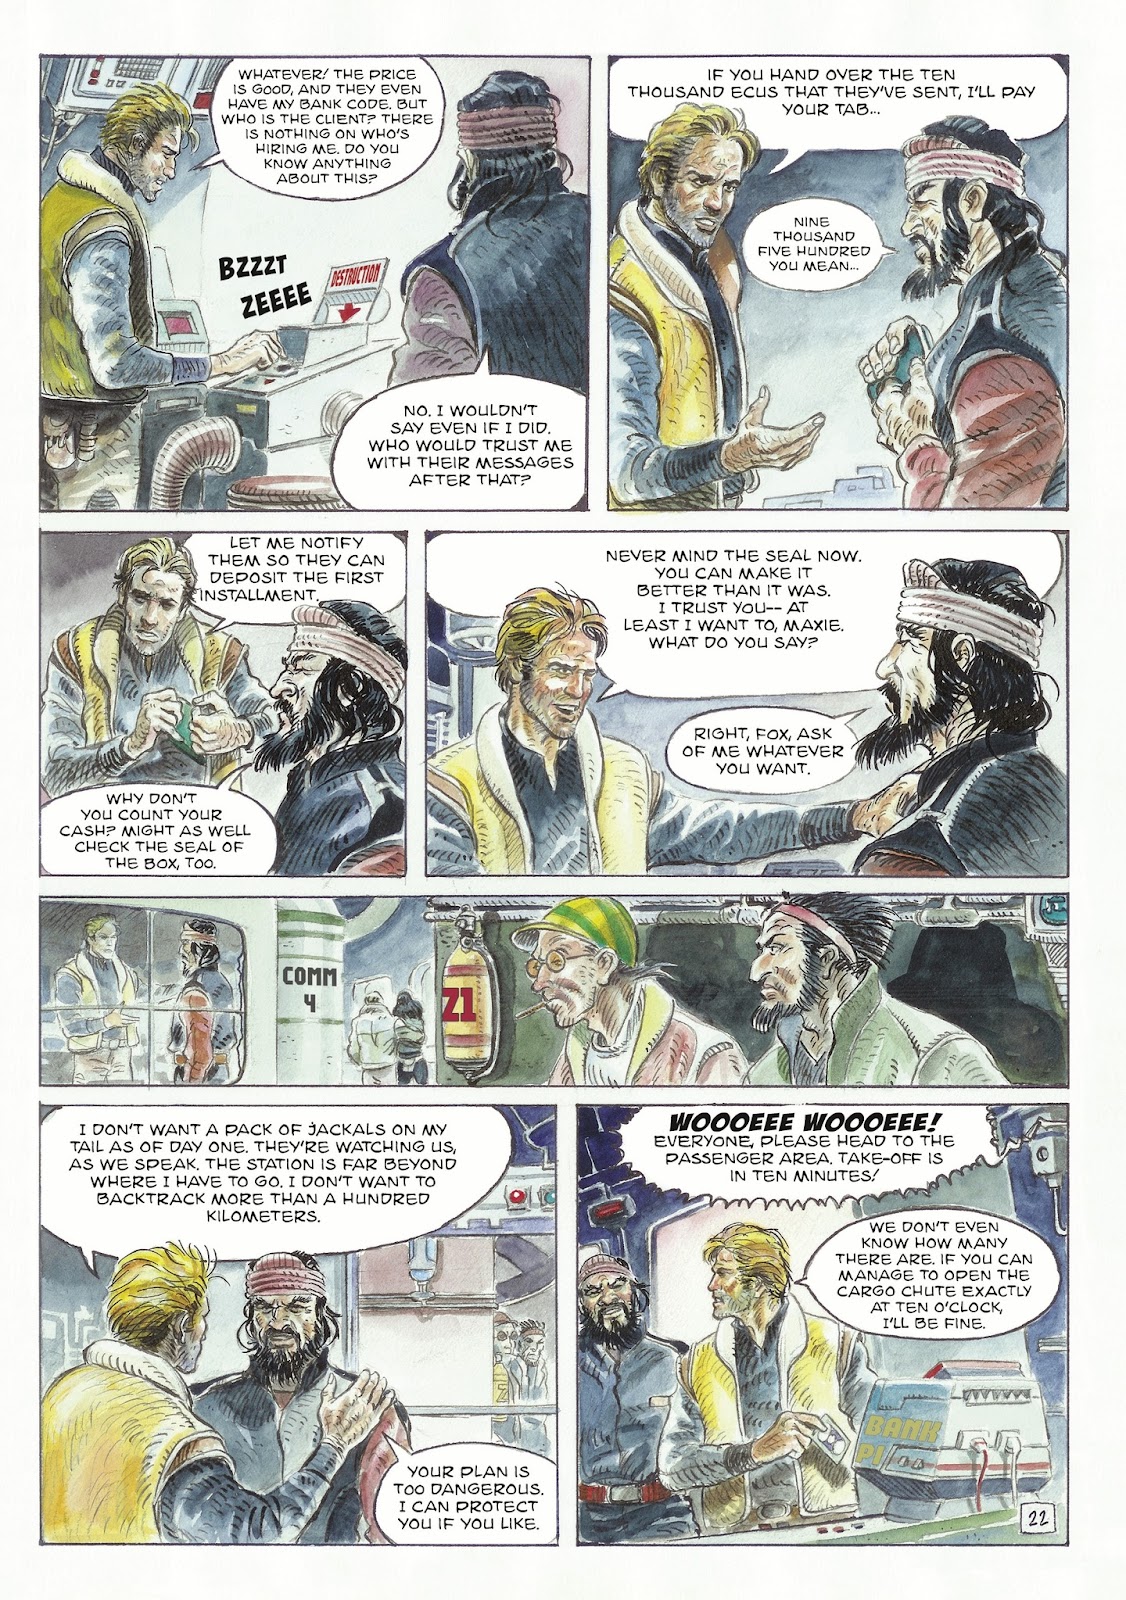 The Man With the Bear issue 1 - Page 24